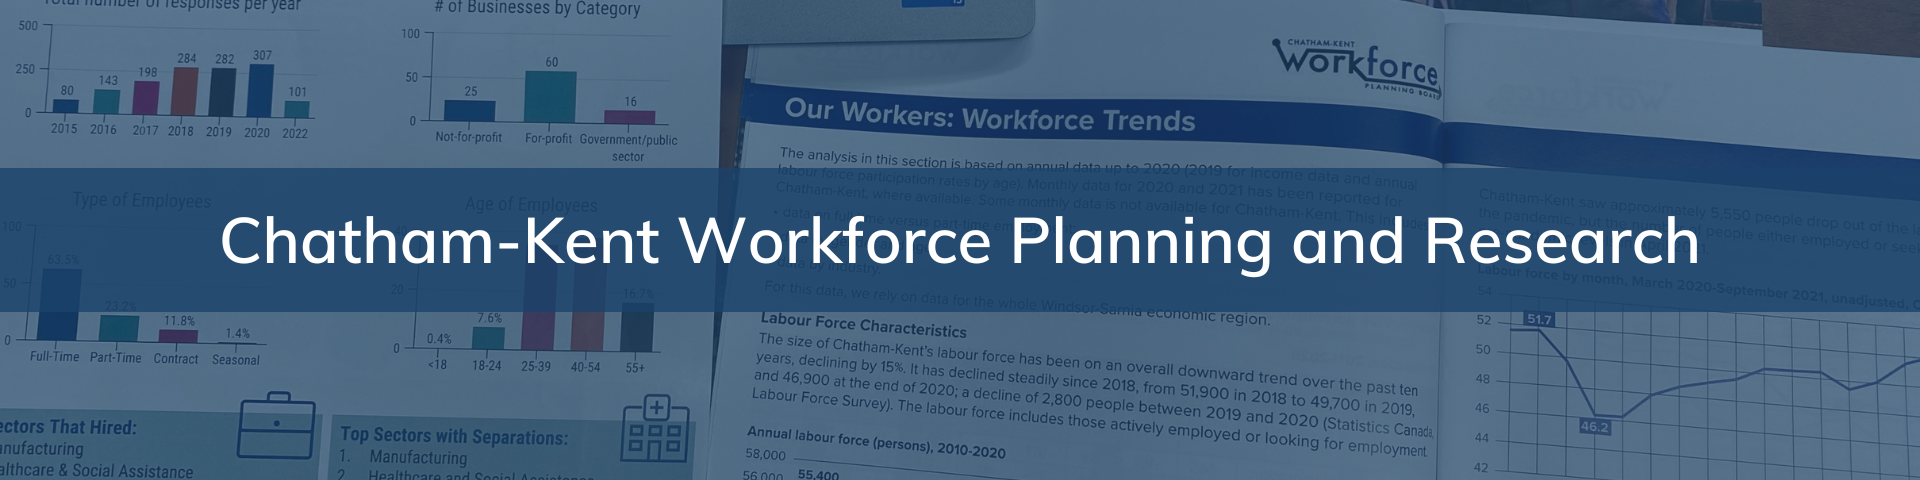 Chatham-Kent Workforce Planning and Research